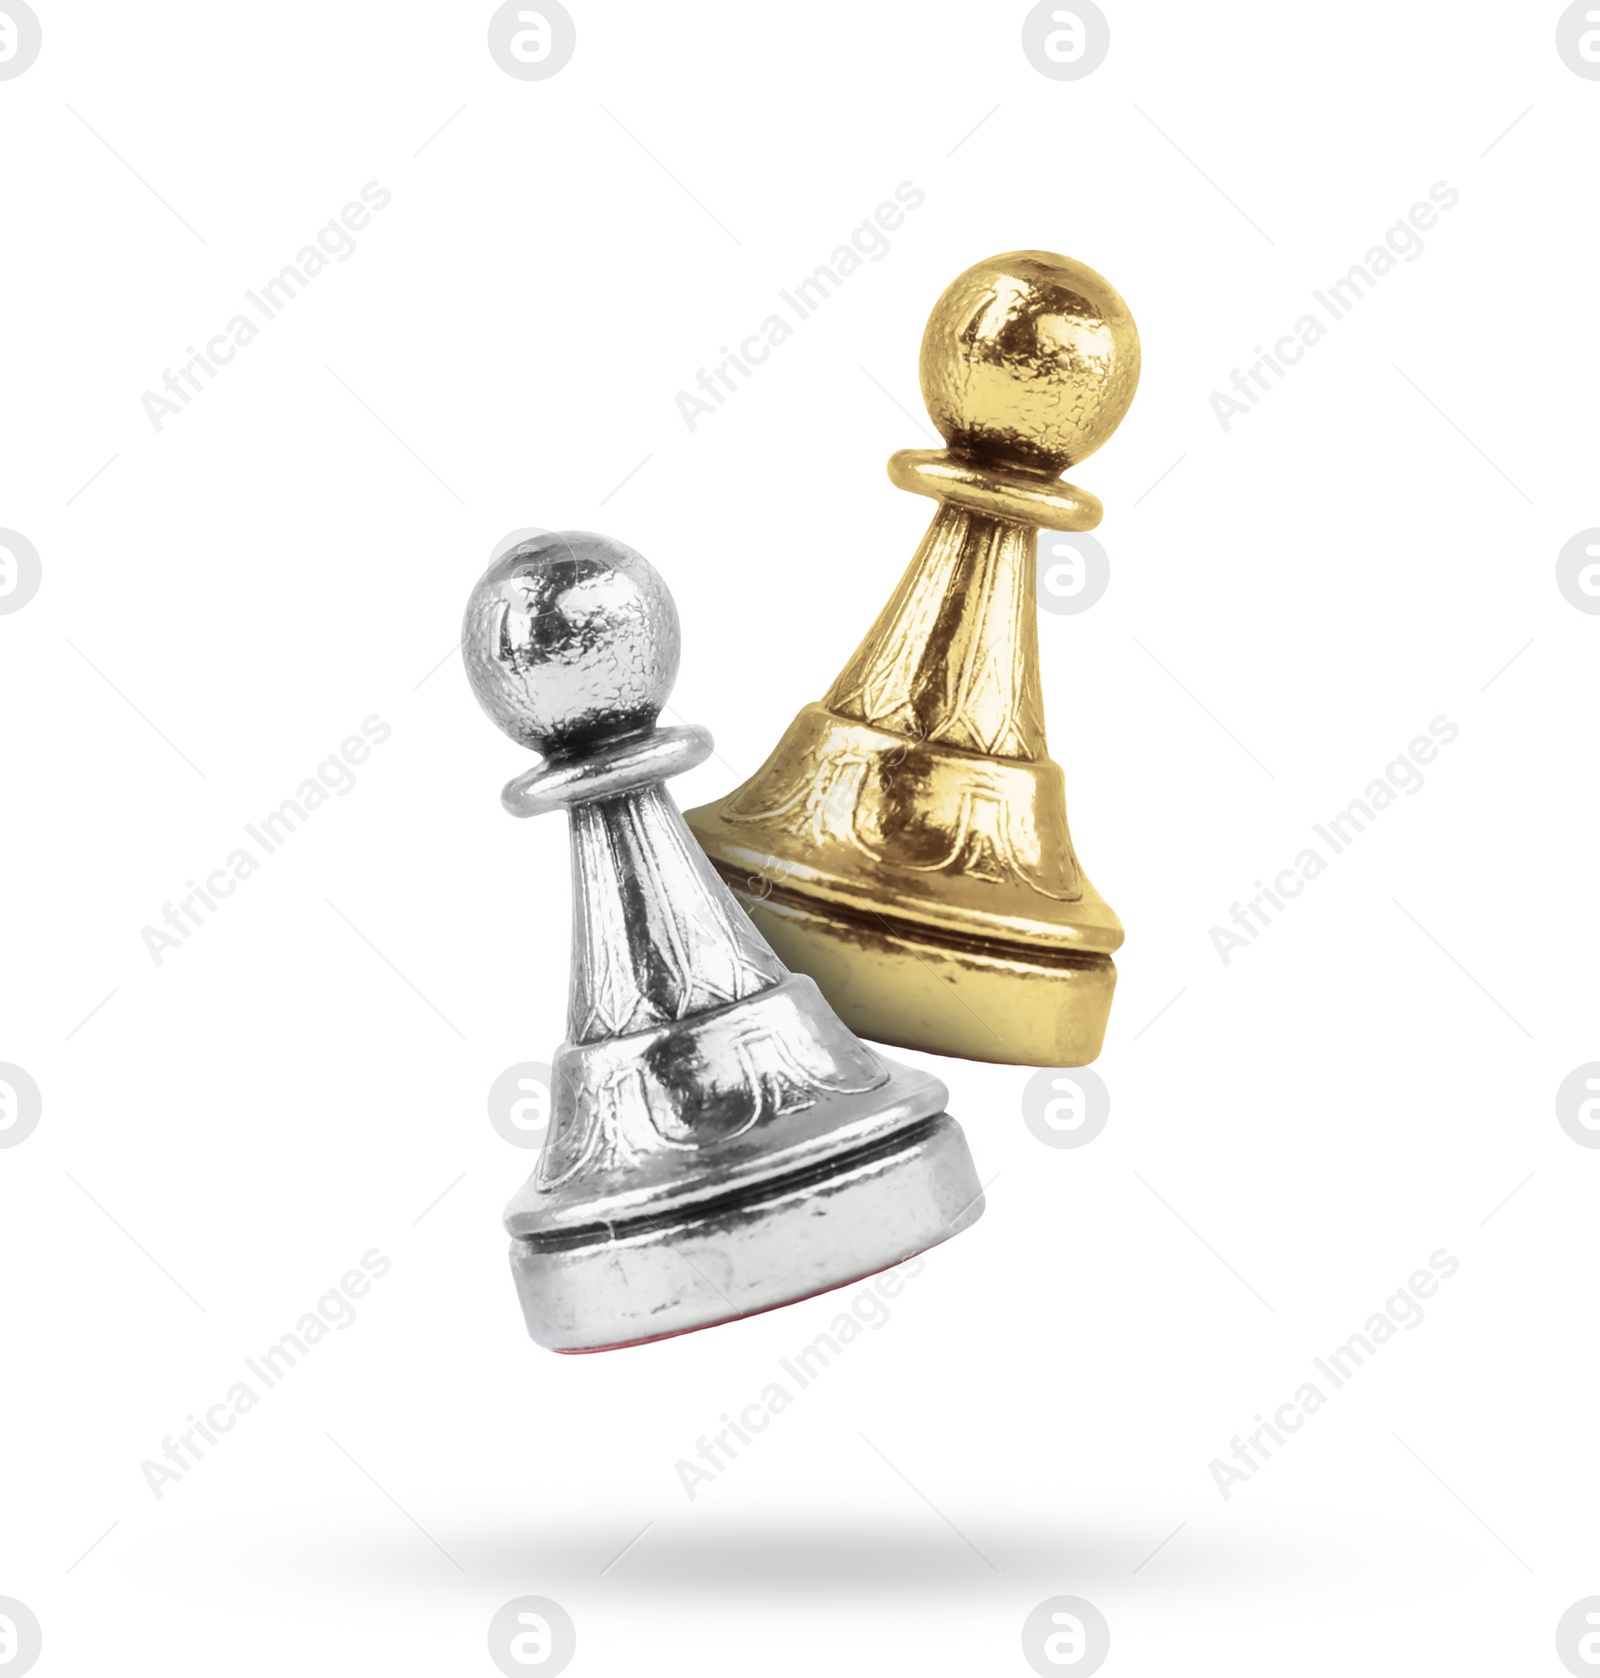 Image of Golden and silver chess pawns in air on white background